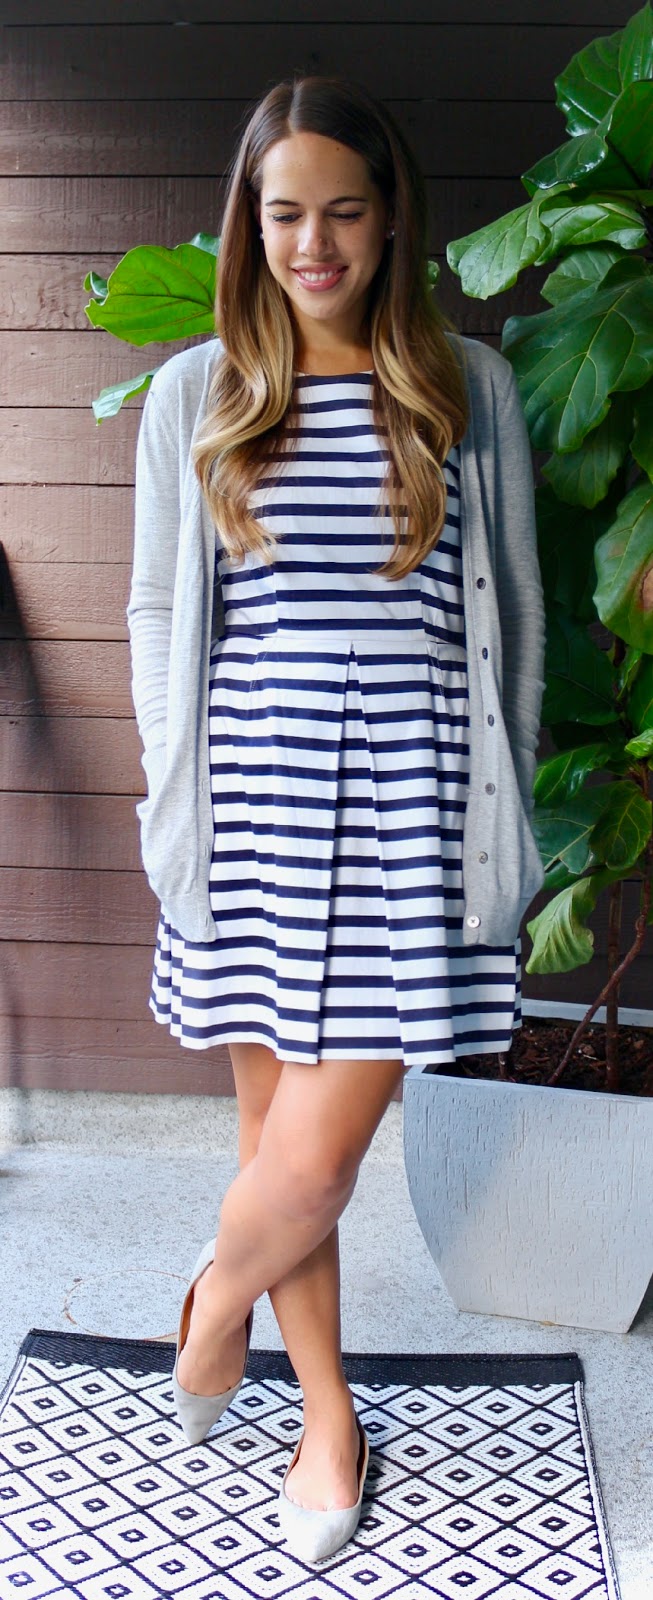 Jules in Flats - Striped Fit and Flare Dress (Business Casual Fall Workwear on a Budget)